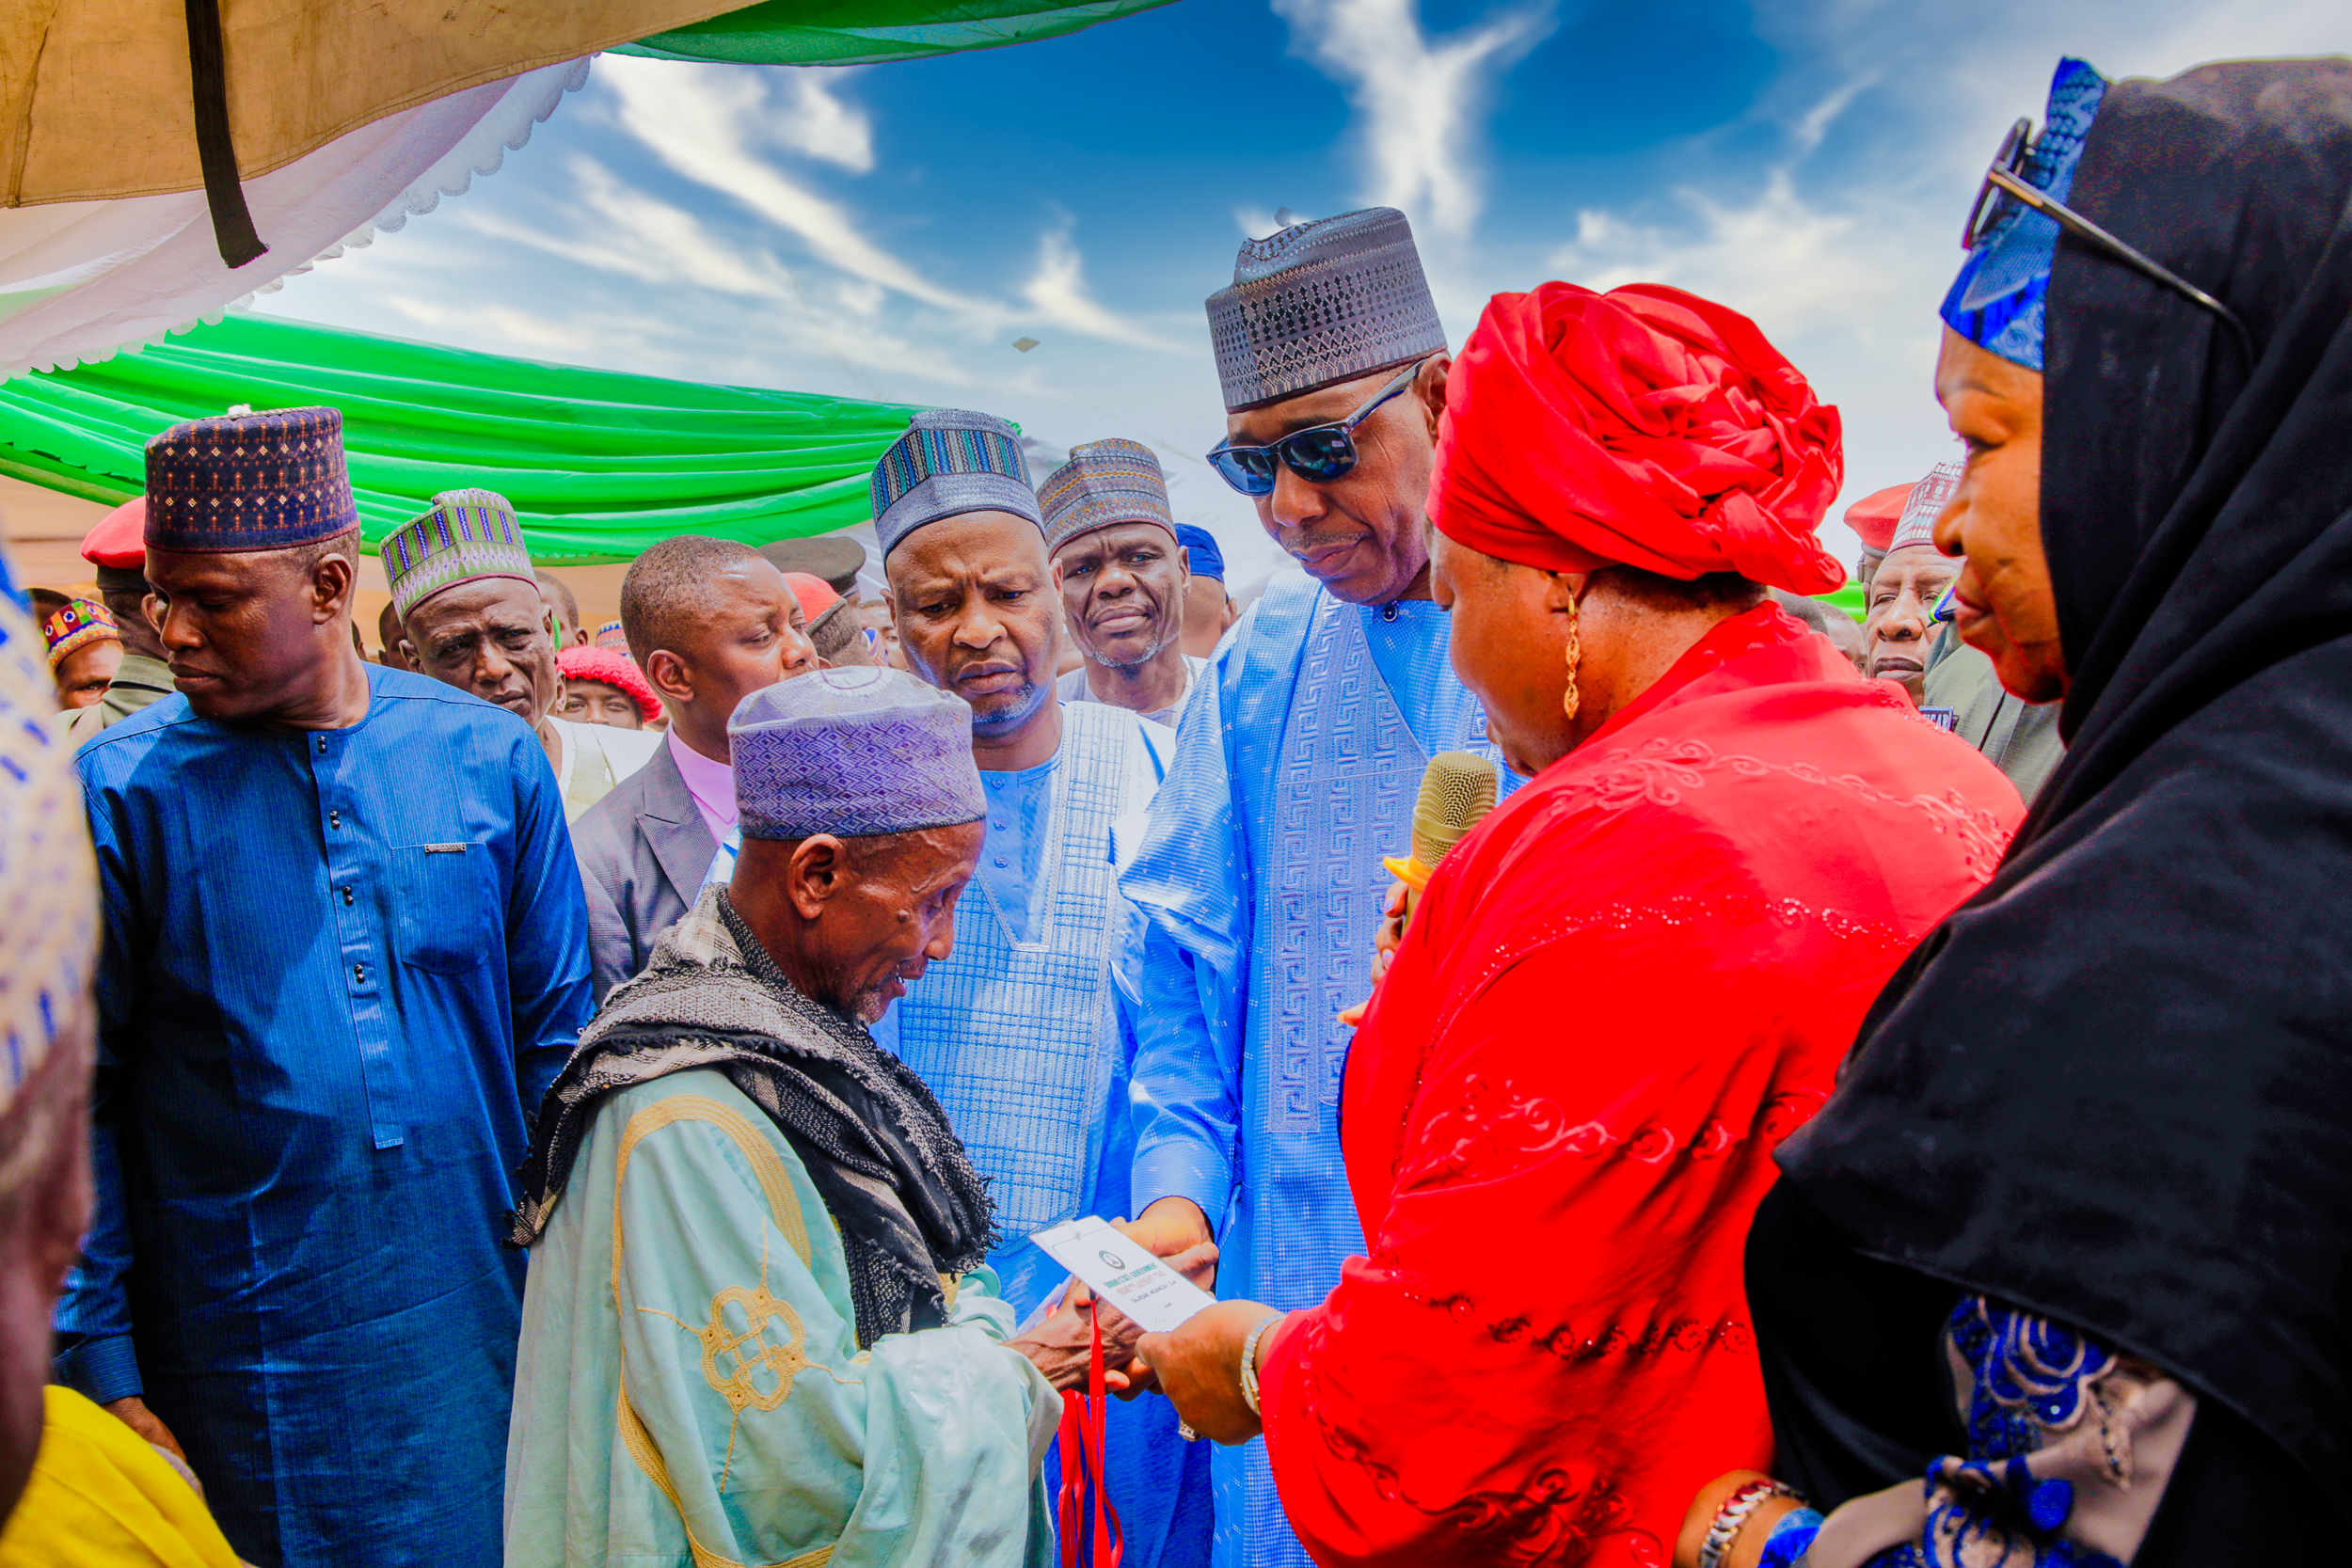 Governor of Borno State, Babagana Umara Zulum and the SSA to the President on SDGs, Princess Adejoke Orelope-Adefulire with one of the beneficiaries of the the 200 units of 2 bedroom houses in IDP Camp in Nganzai, Borno State